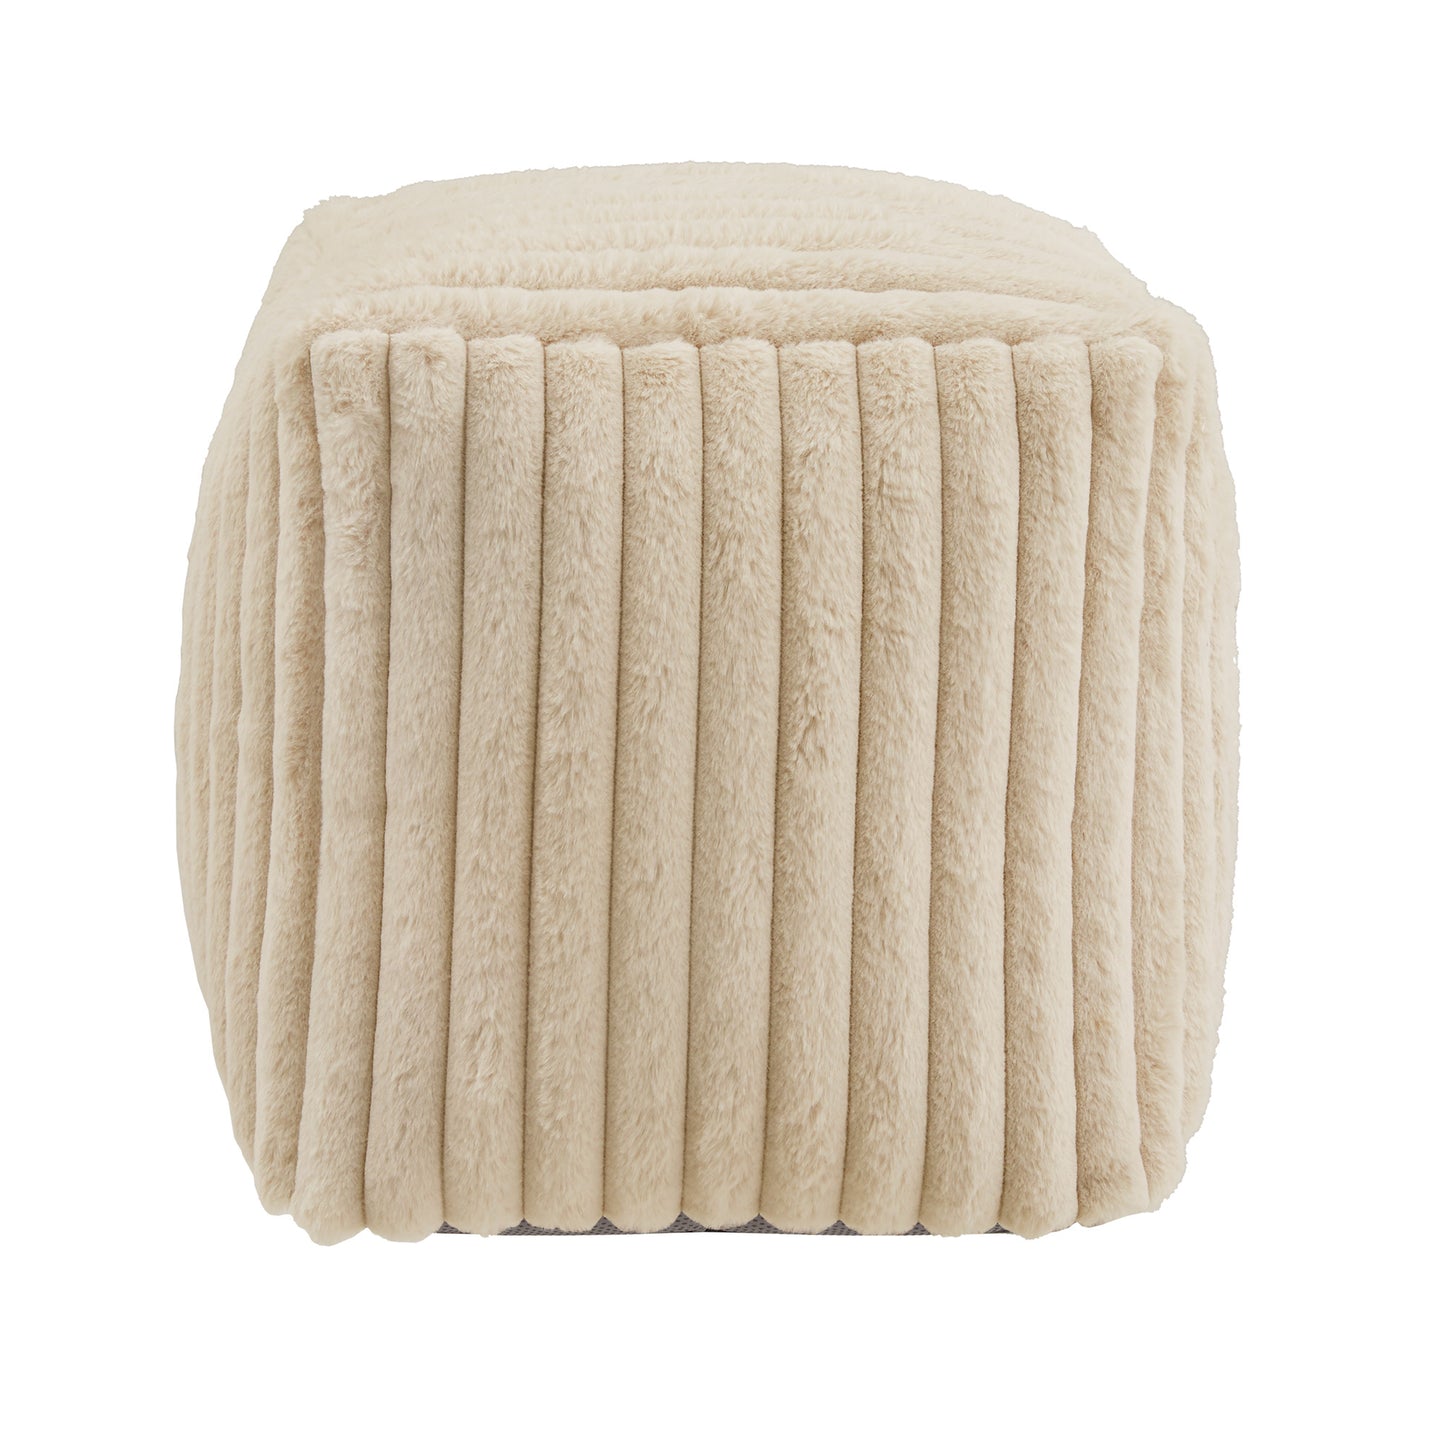 Upholstered Square Pouf Ottoman - Taupe Channel Furry Fabric